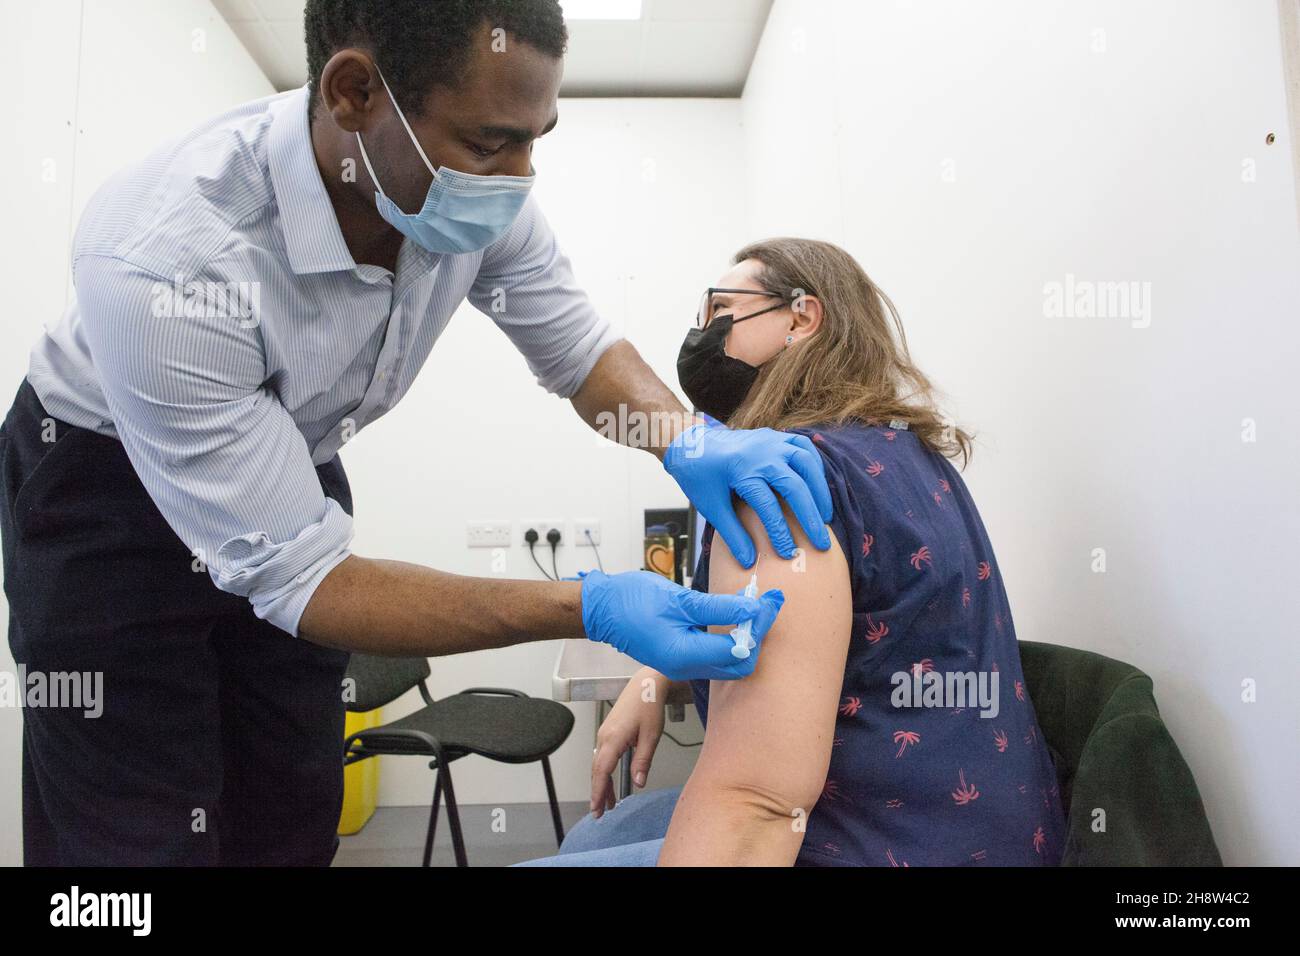 London, UK, 2 December 2021: Helen Eastman, 42, receives her Pfizer booster jab at Pearl Chemists pop-up vaccination centre in Tooting, south London. The government have promised to offer all adults a third vaccination dose by the end of January 2022 in the face of fears that the omicron varant could spread rapidly once it starts community transmission in the UK. Anna Watson/Alamy Live News Stock Photo